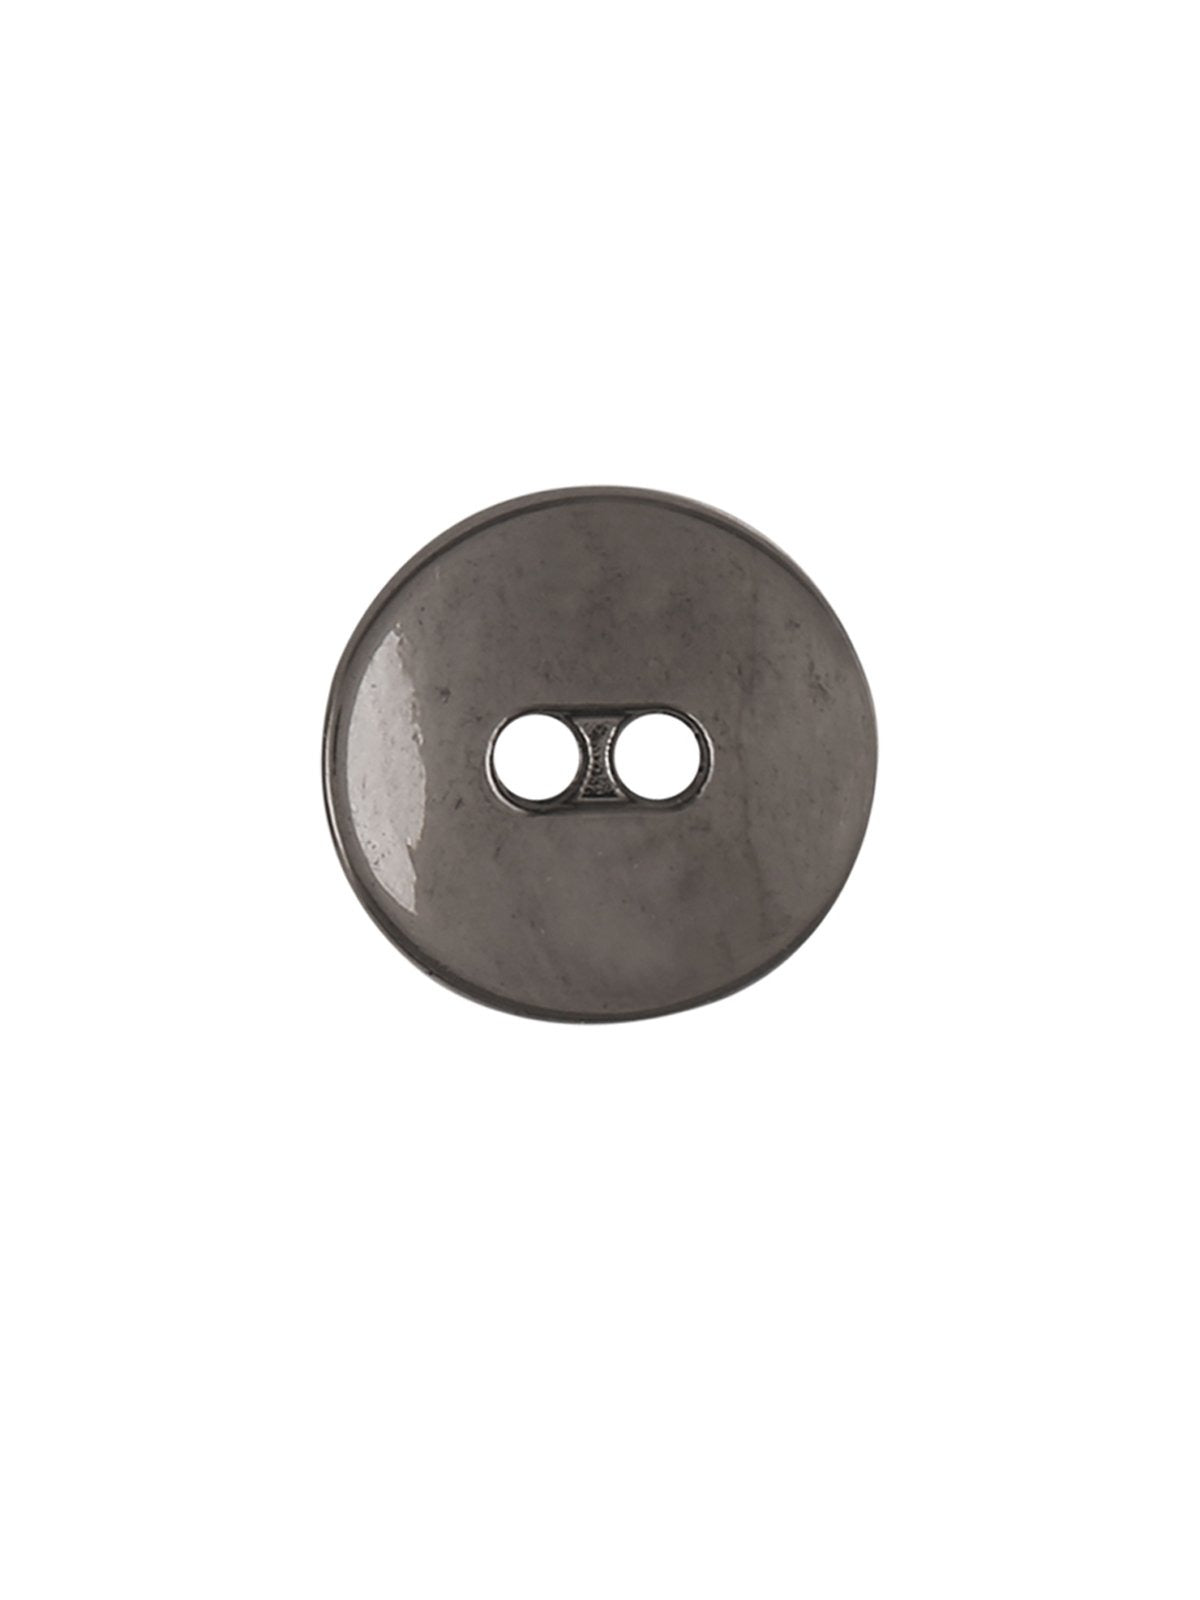 Fashionable Round Shape with Curvy Structure Metal Button in Black Nickel (Gunmetal)  Color